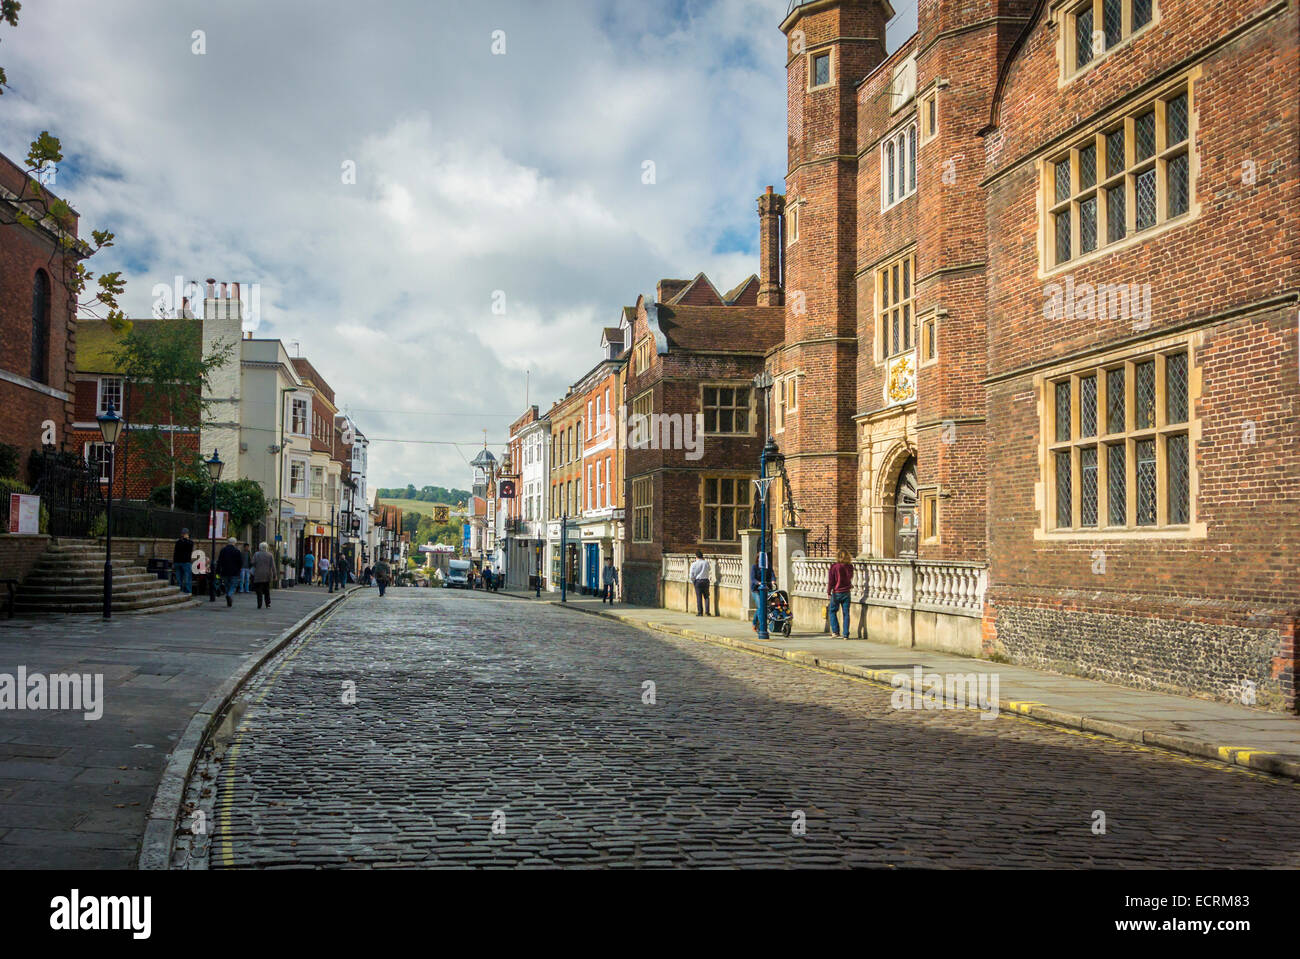 Guildford cobbled High Street and almshouses Stock Photo